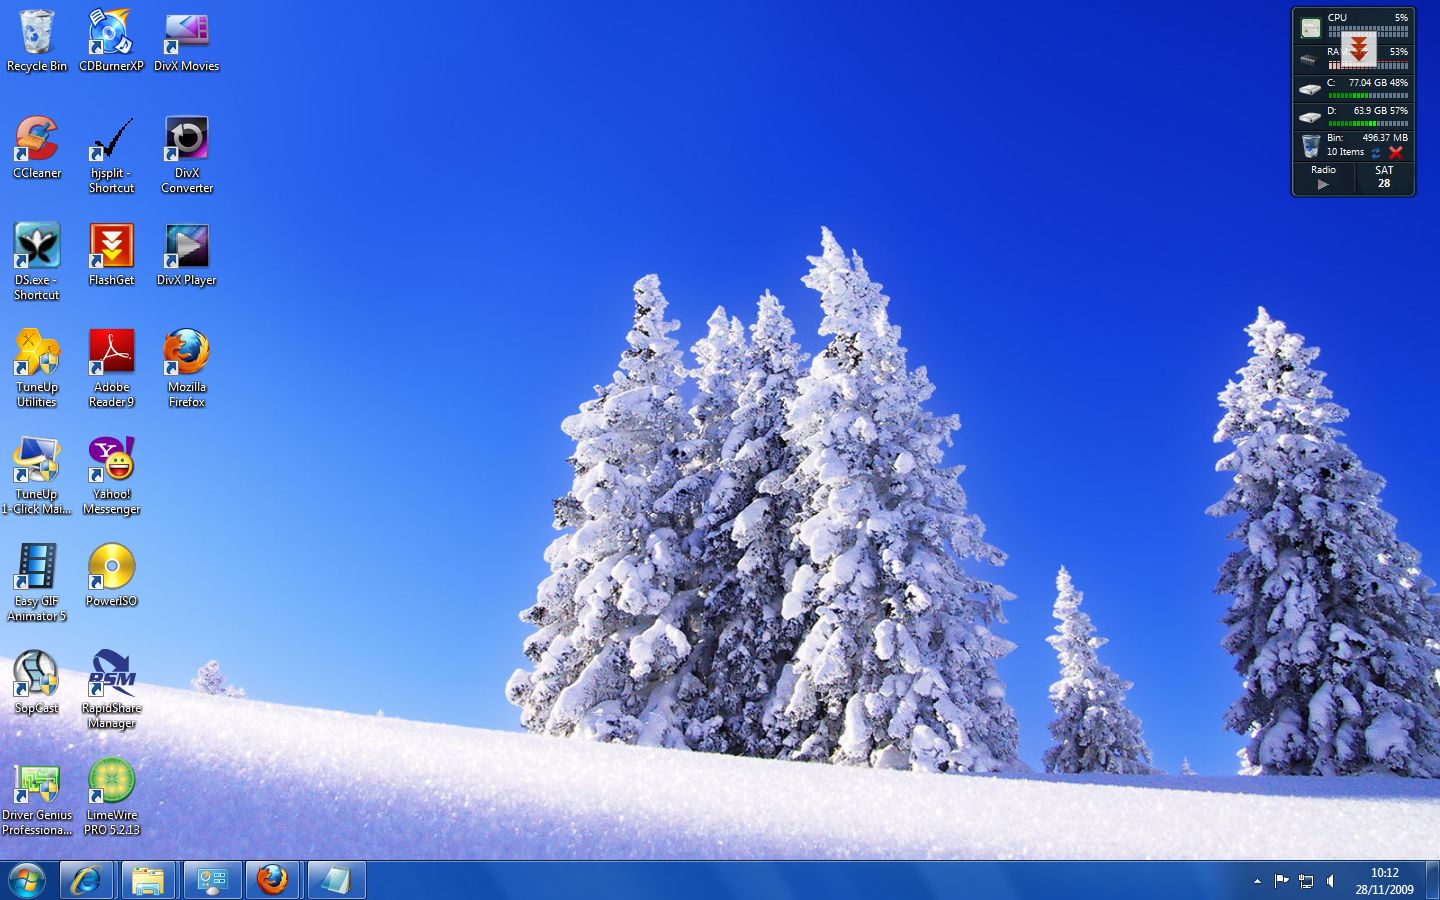 Free Windows Wallpaper And Themes - Computer Hd Theme Download - 1440x900  Wallpaper 